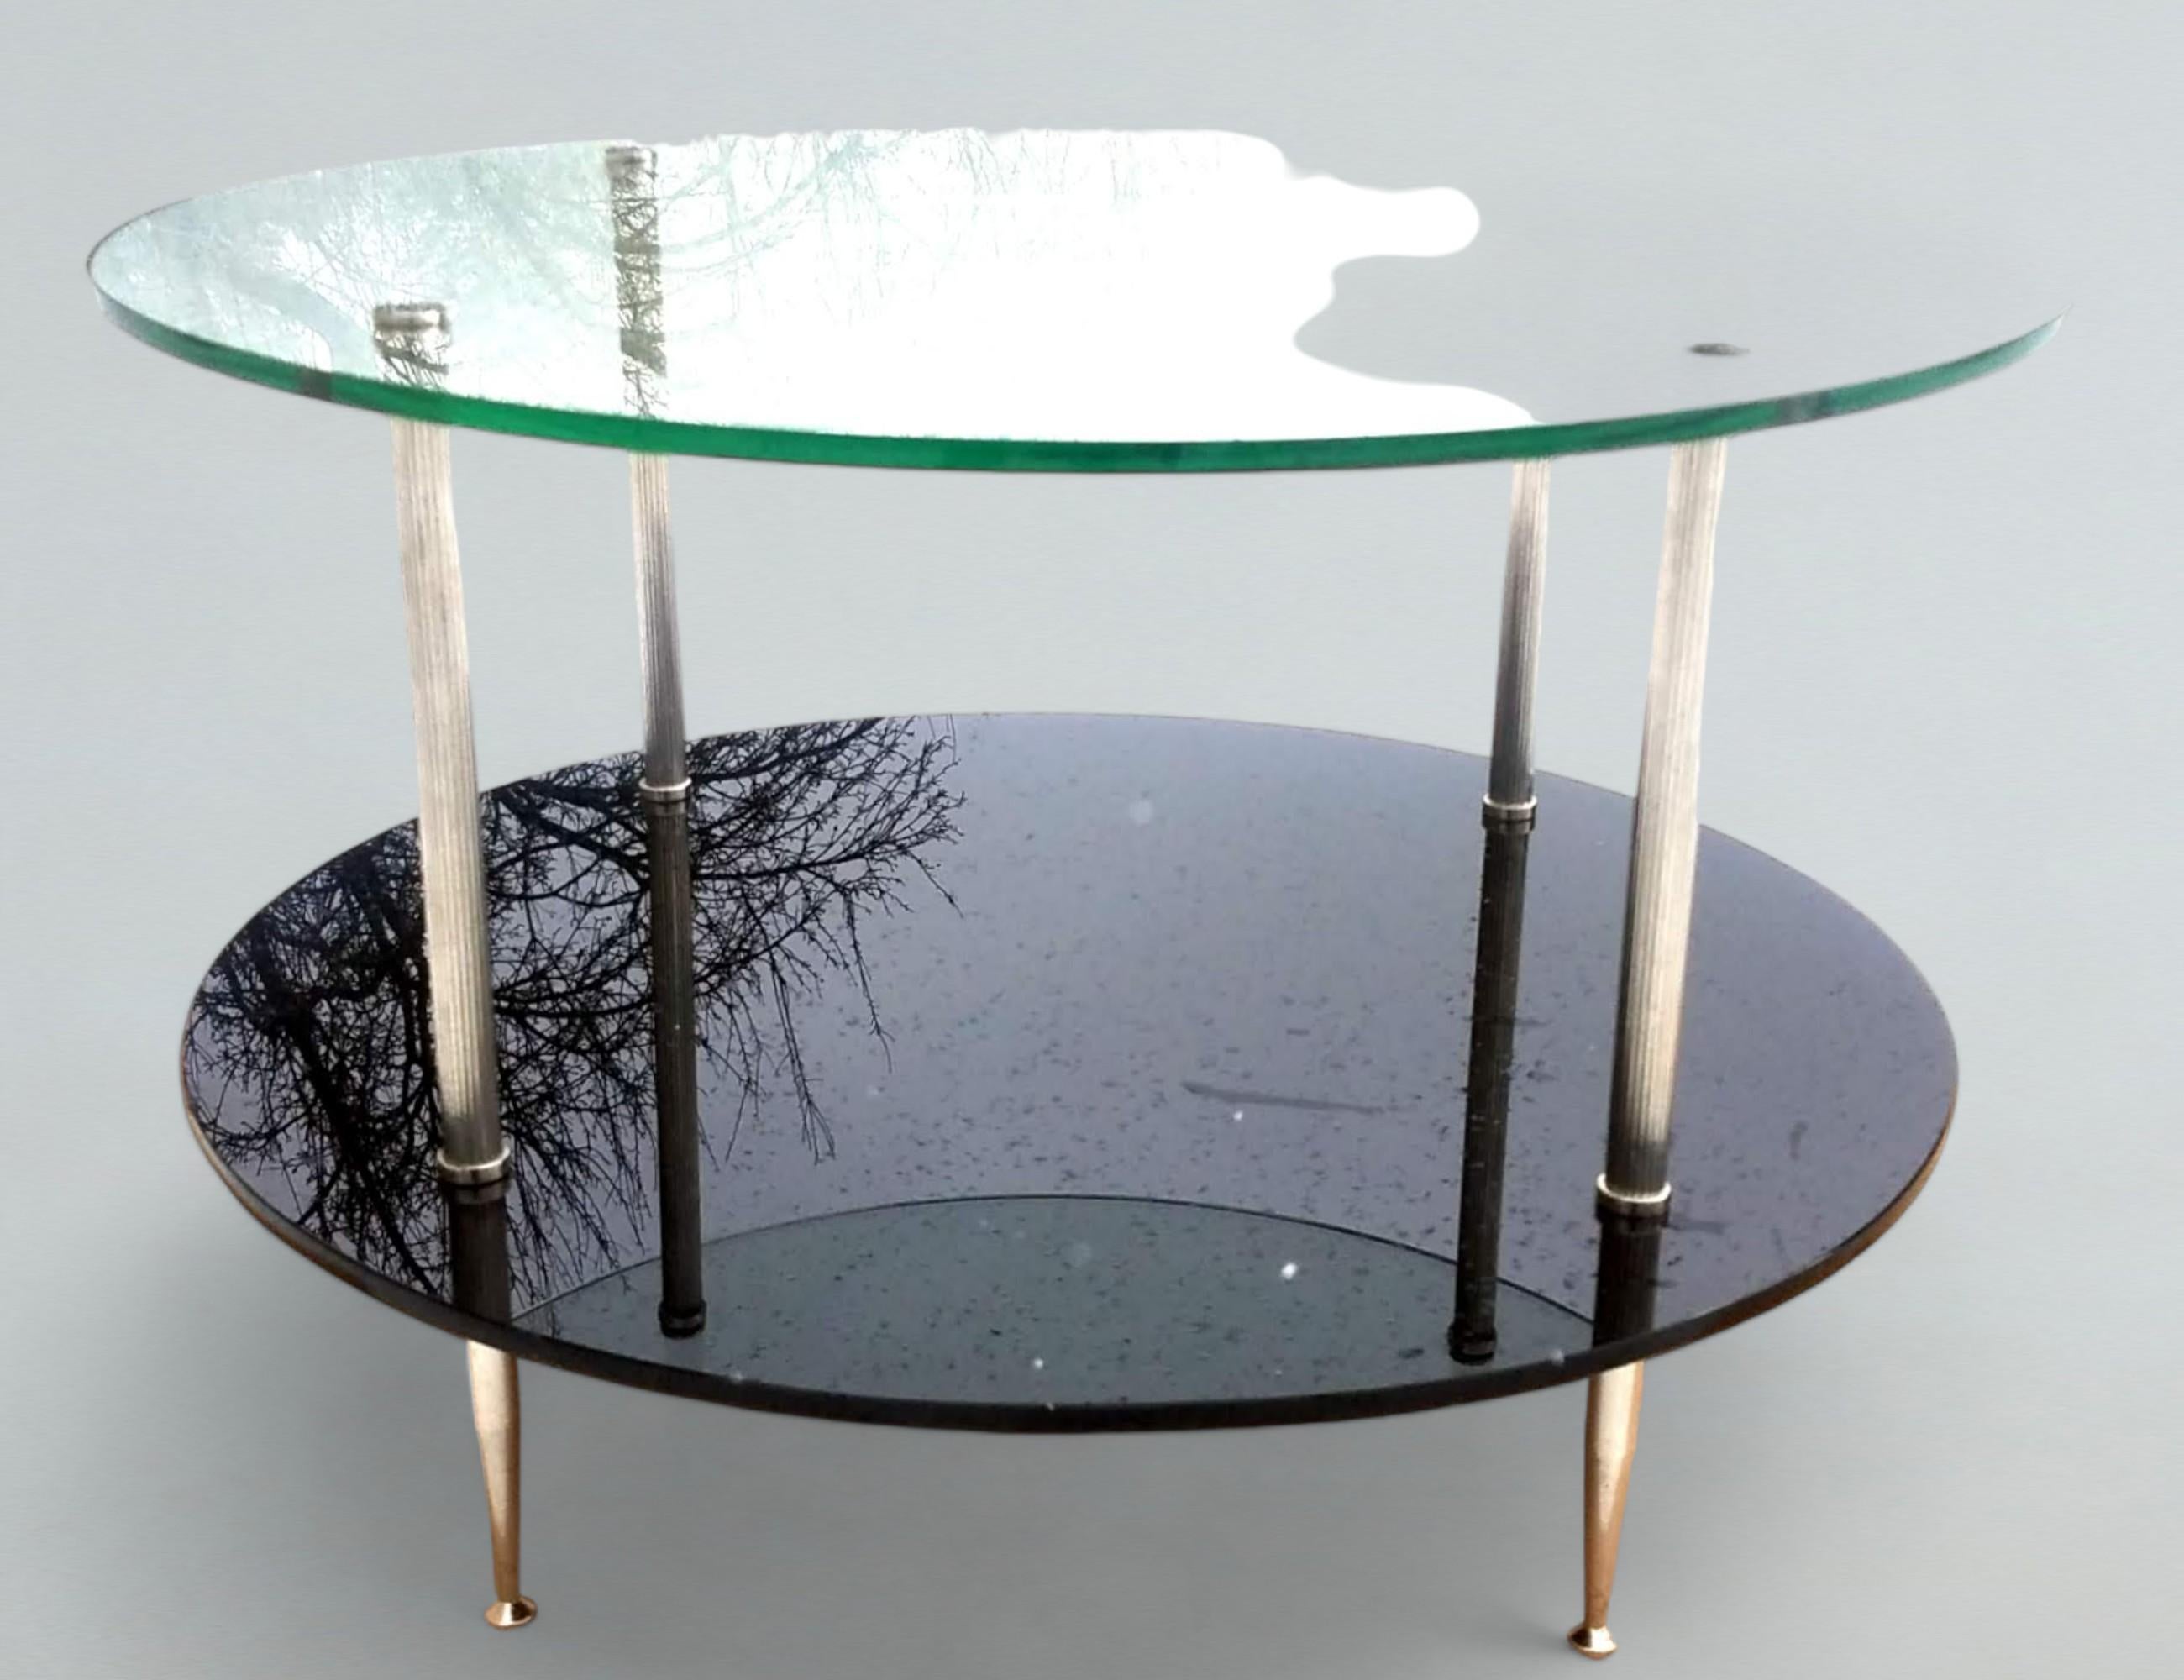 Maison Charles silver plated coffee table two tiered clear glass and black Vitrolite circular shelves.
The polished reeded legs end in slender points
The table is in excellent condition.